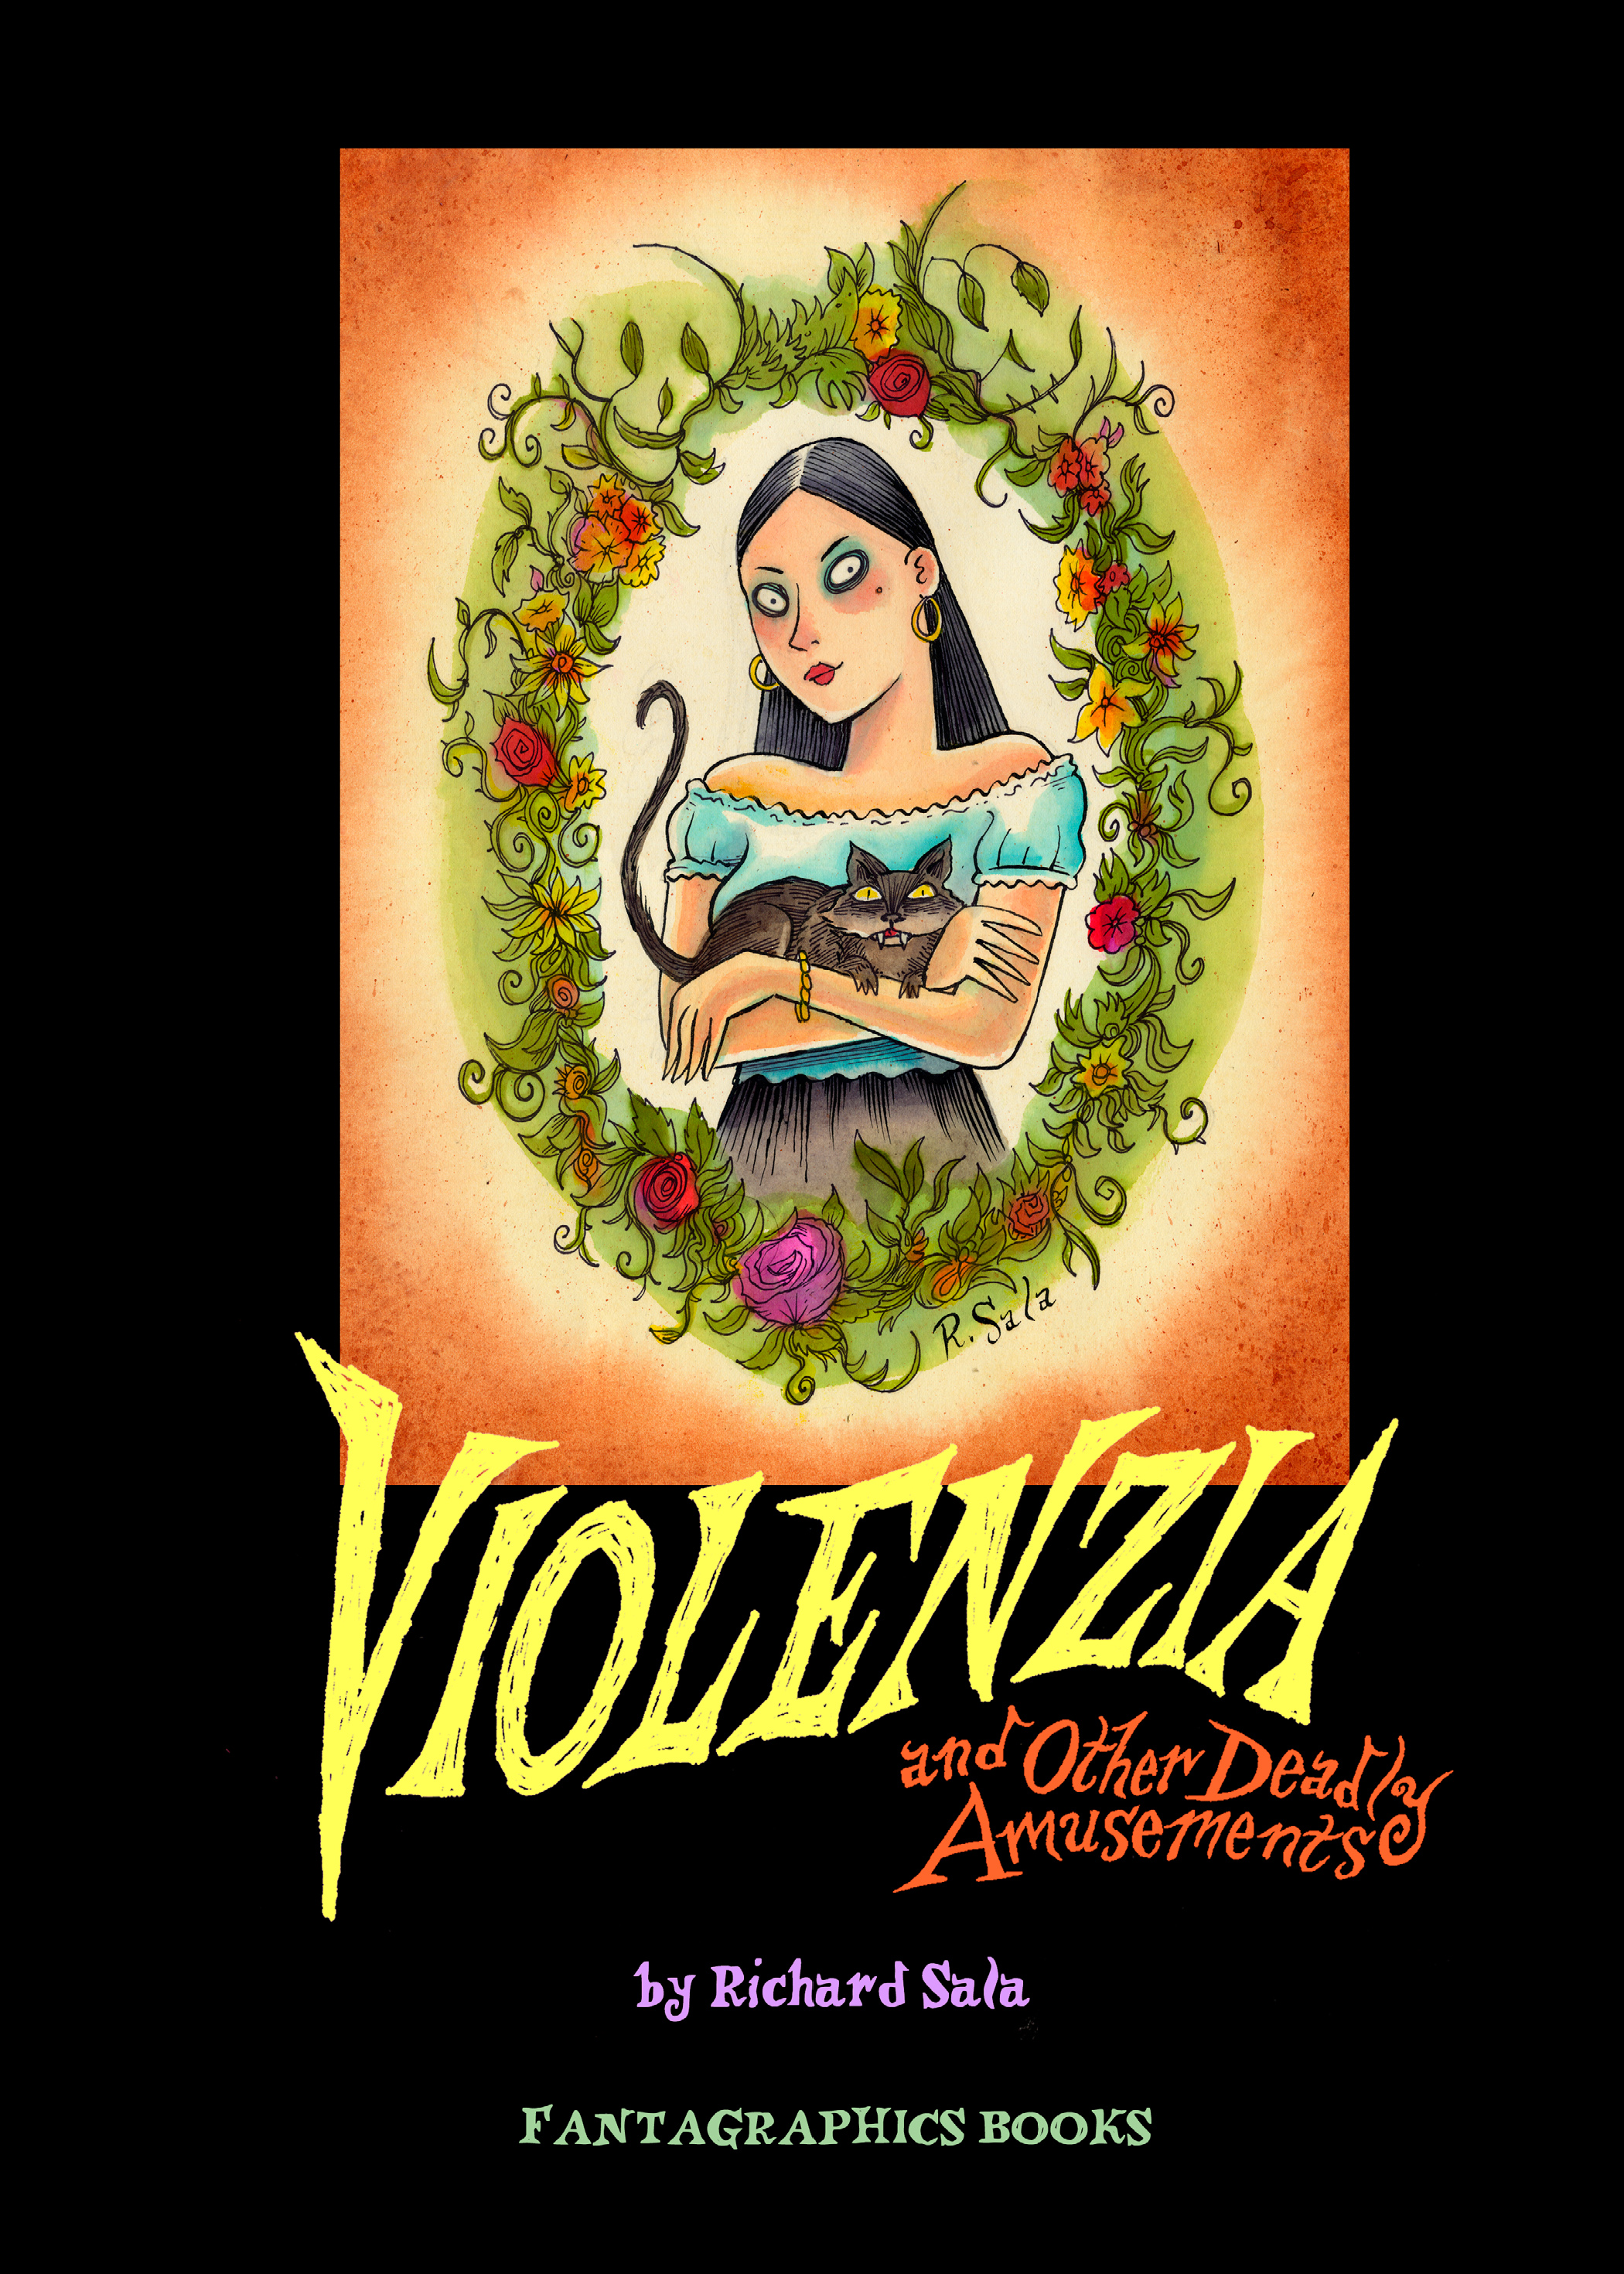 Read online Violenzia and Other Deadly Amusements comic -  Issue # TPB - 2